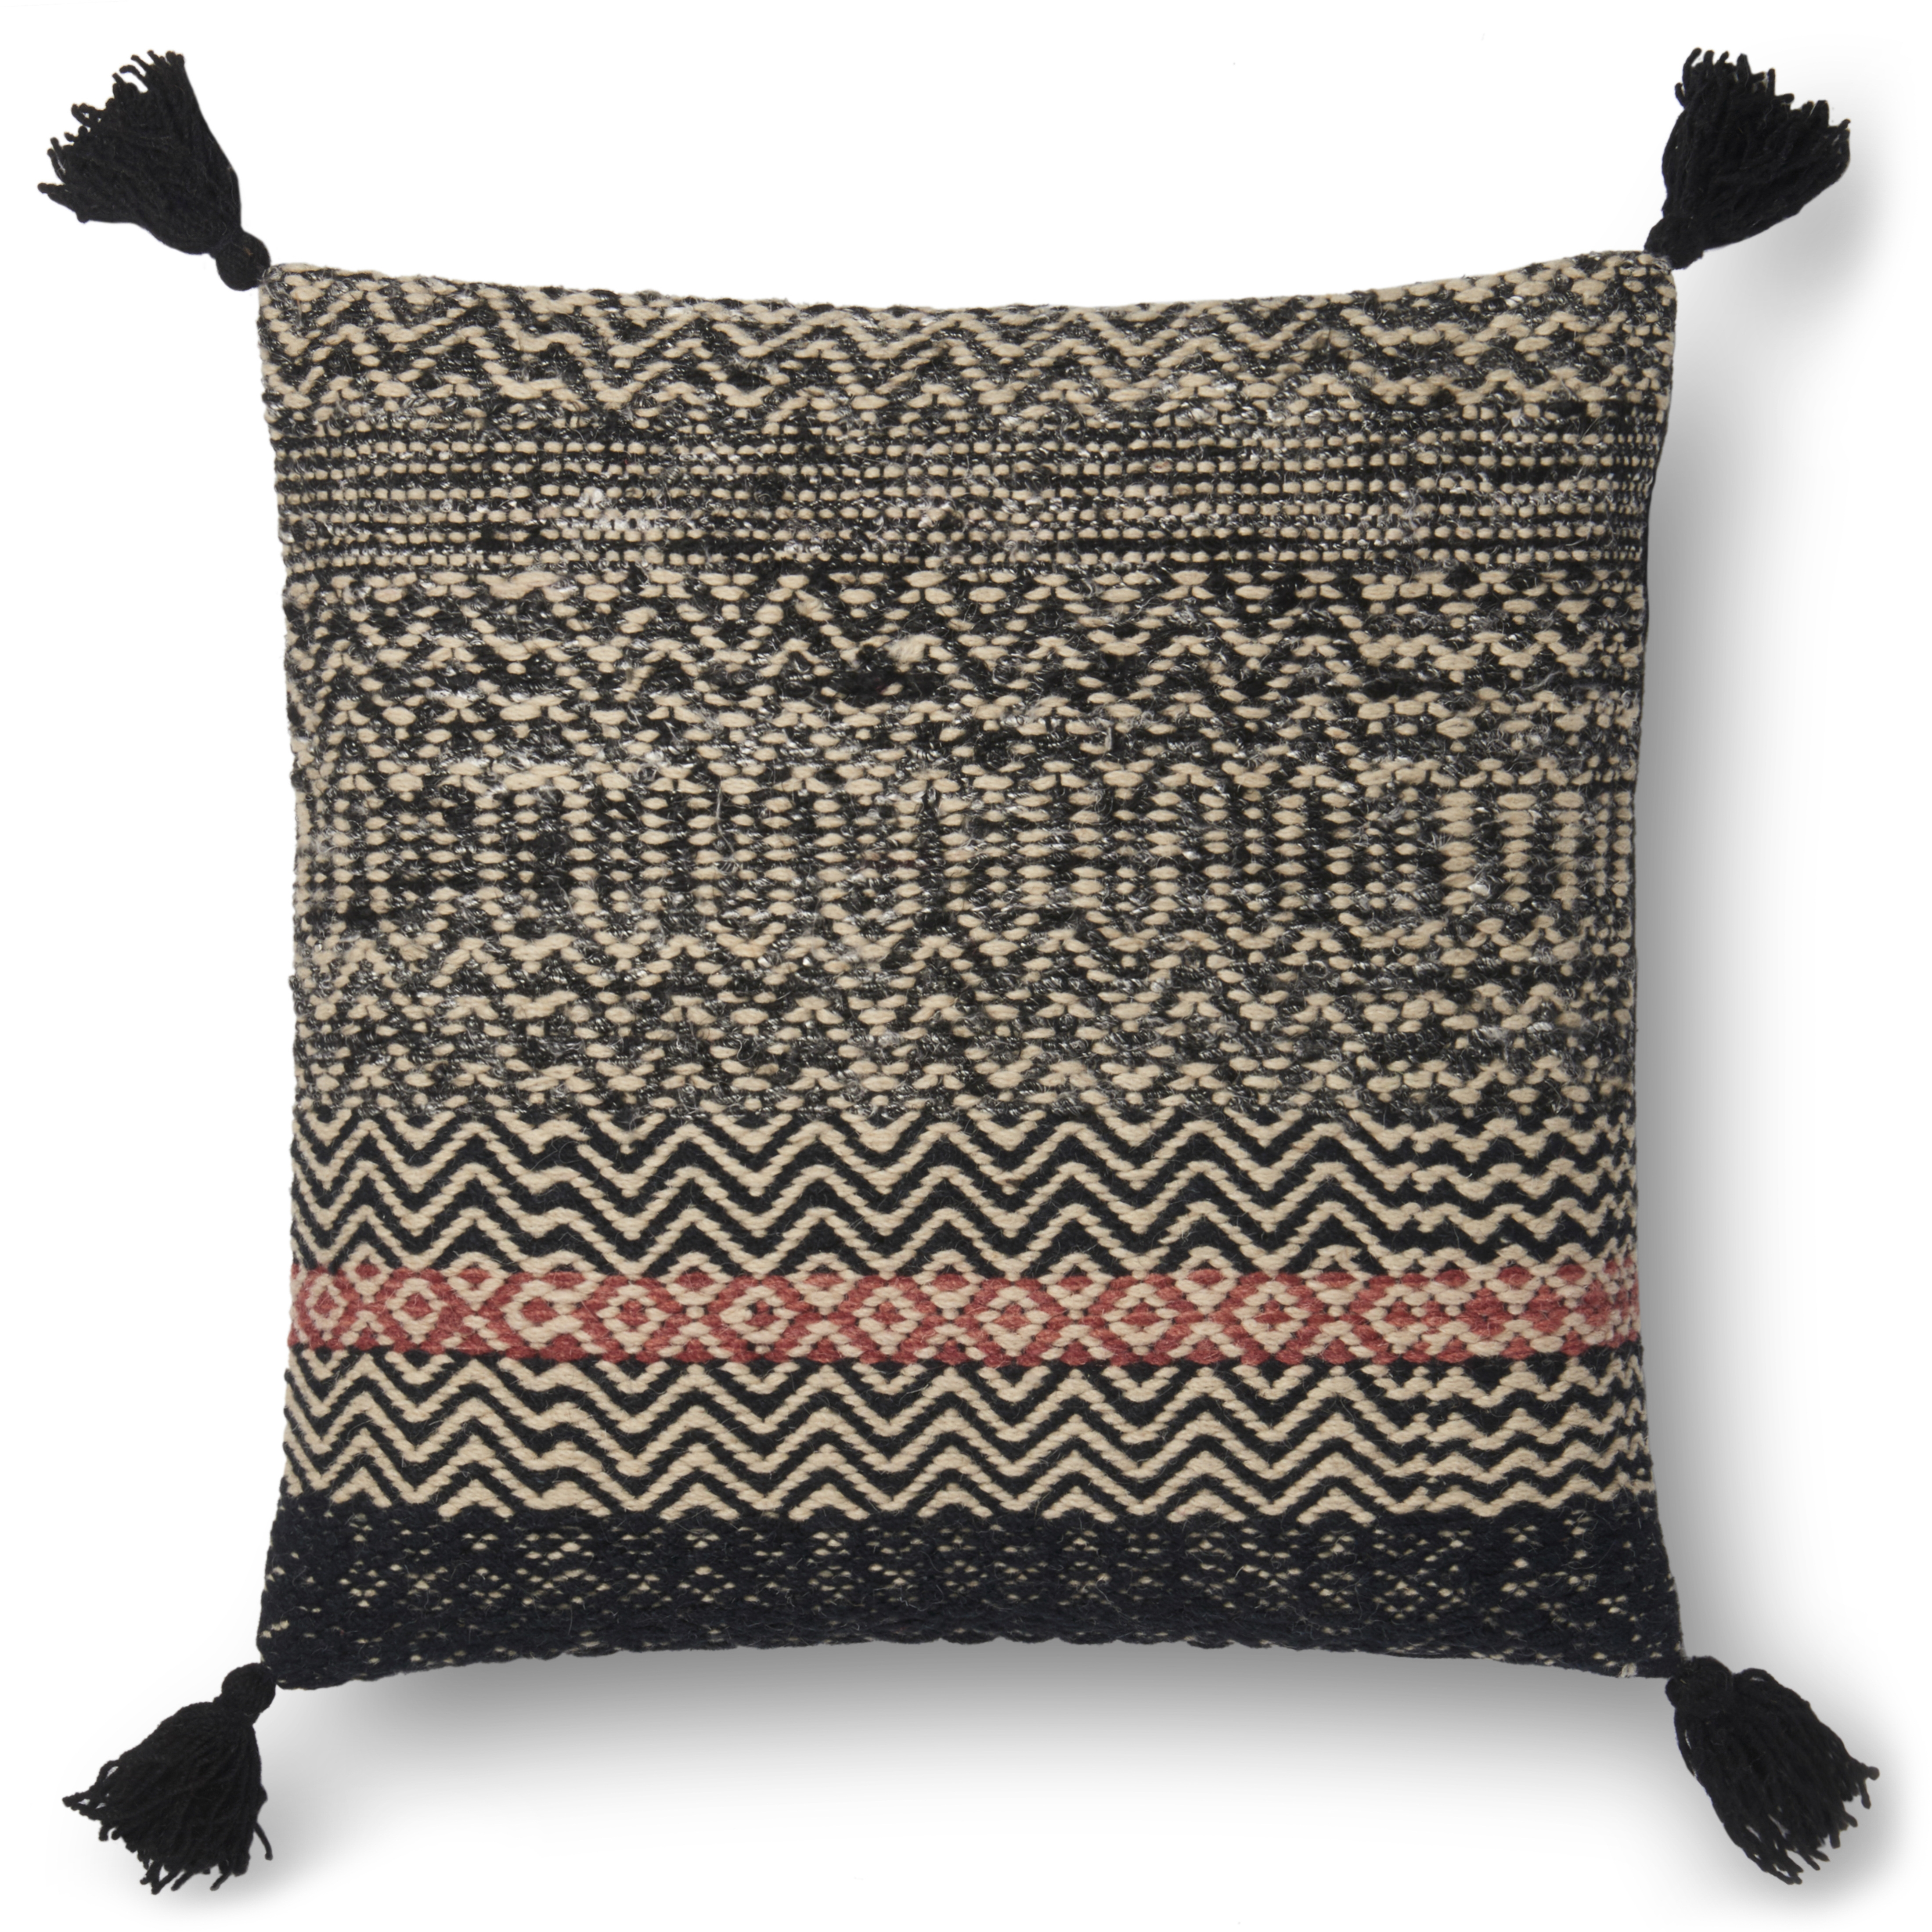 Loloi PILLOWS P0564 Black 13" x 21" Cover Only - Image 1